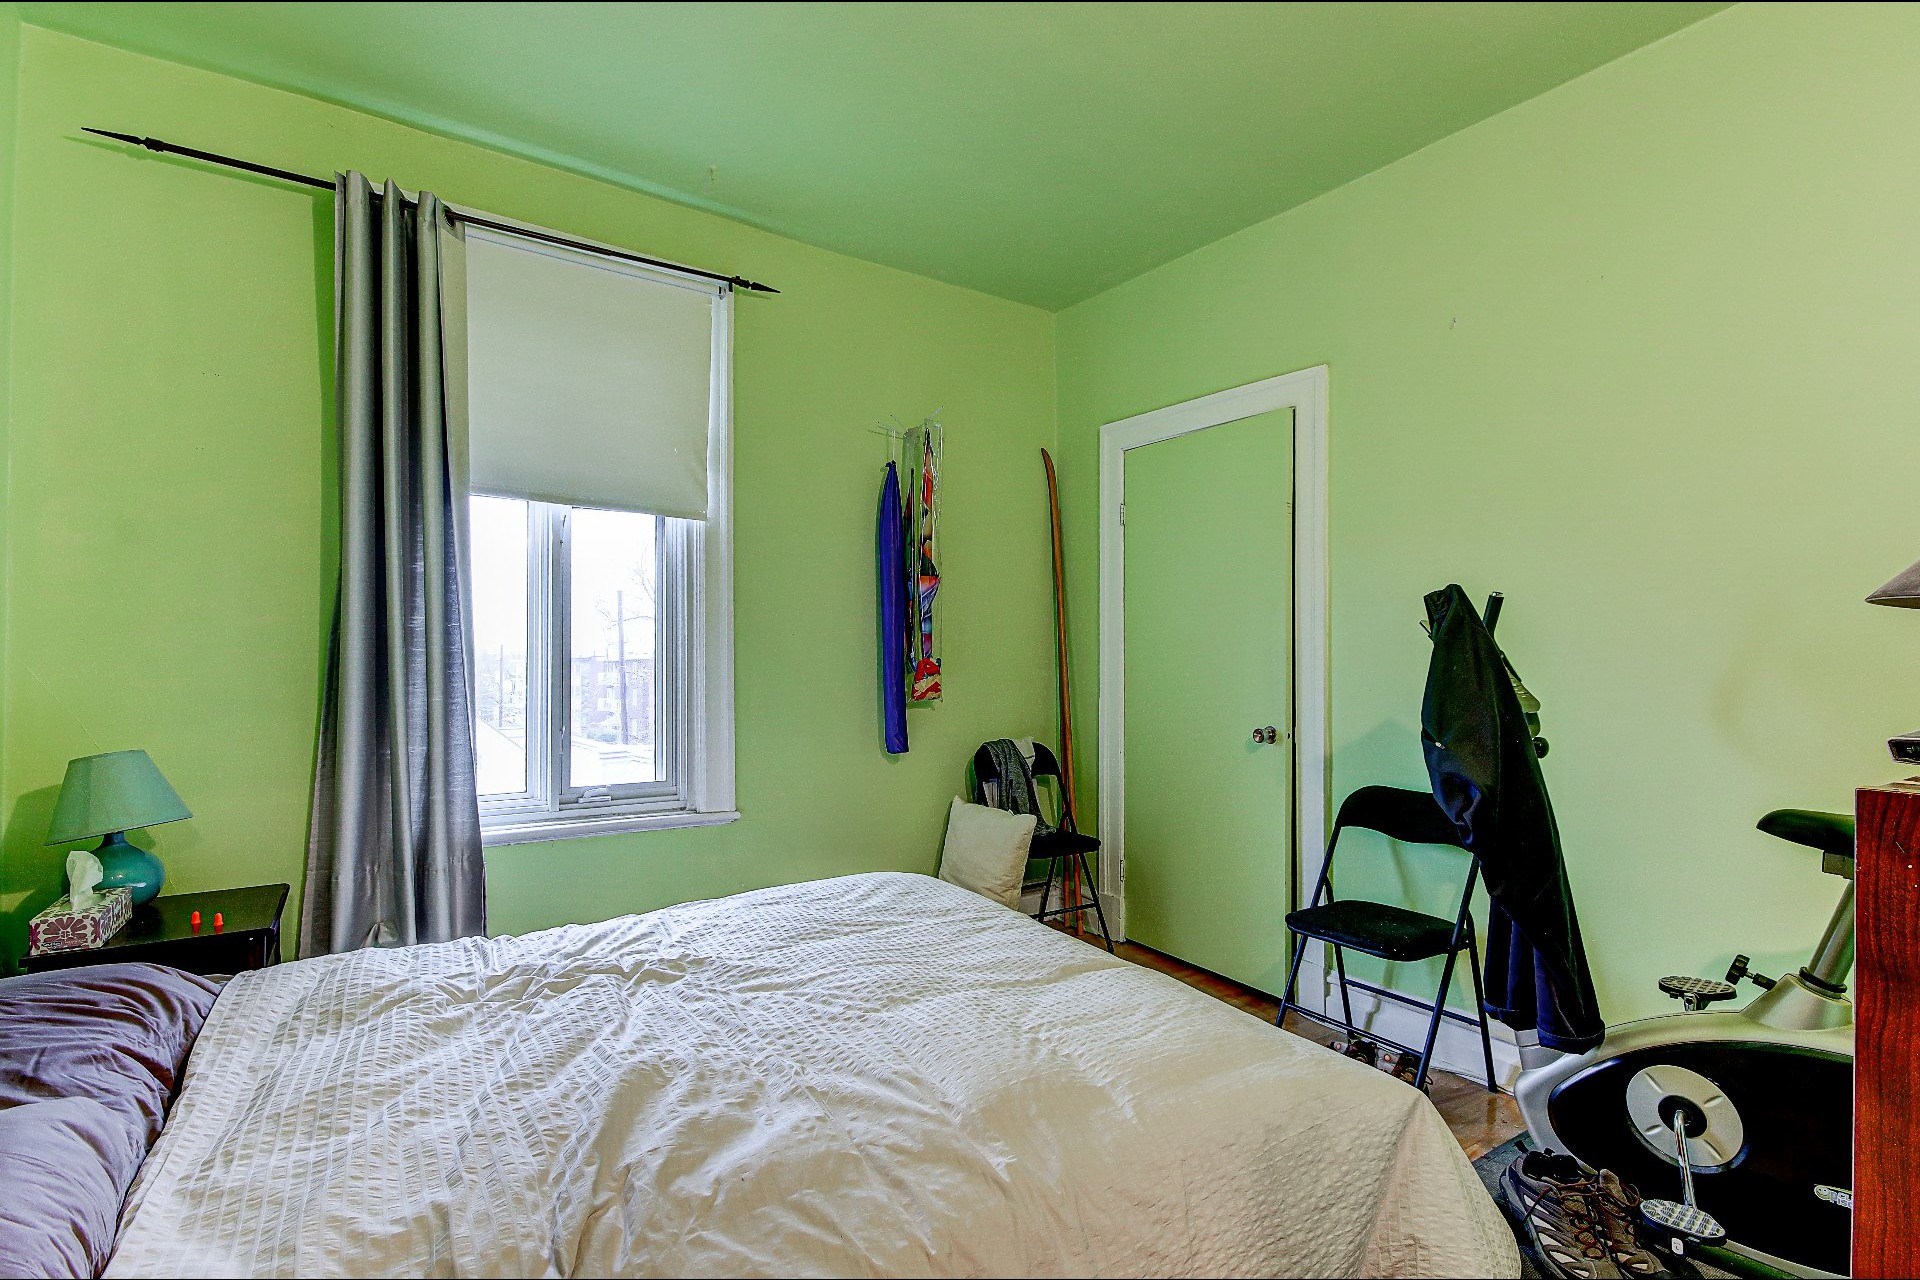 image 43 - Income property For sale Le Vieux-Longueuil Longueuil  - 6 rooms